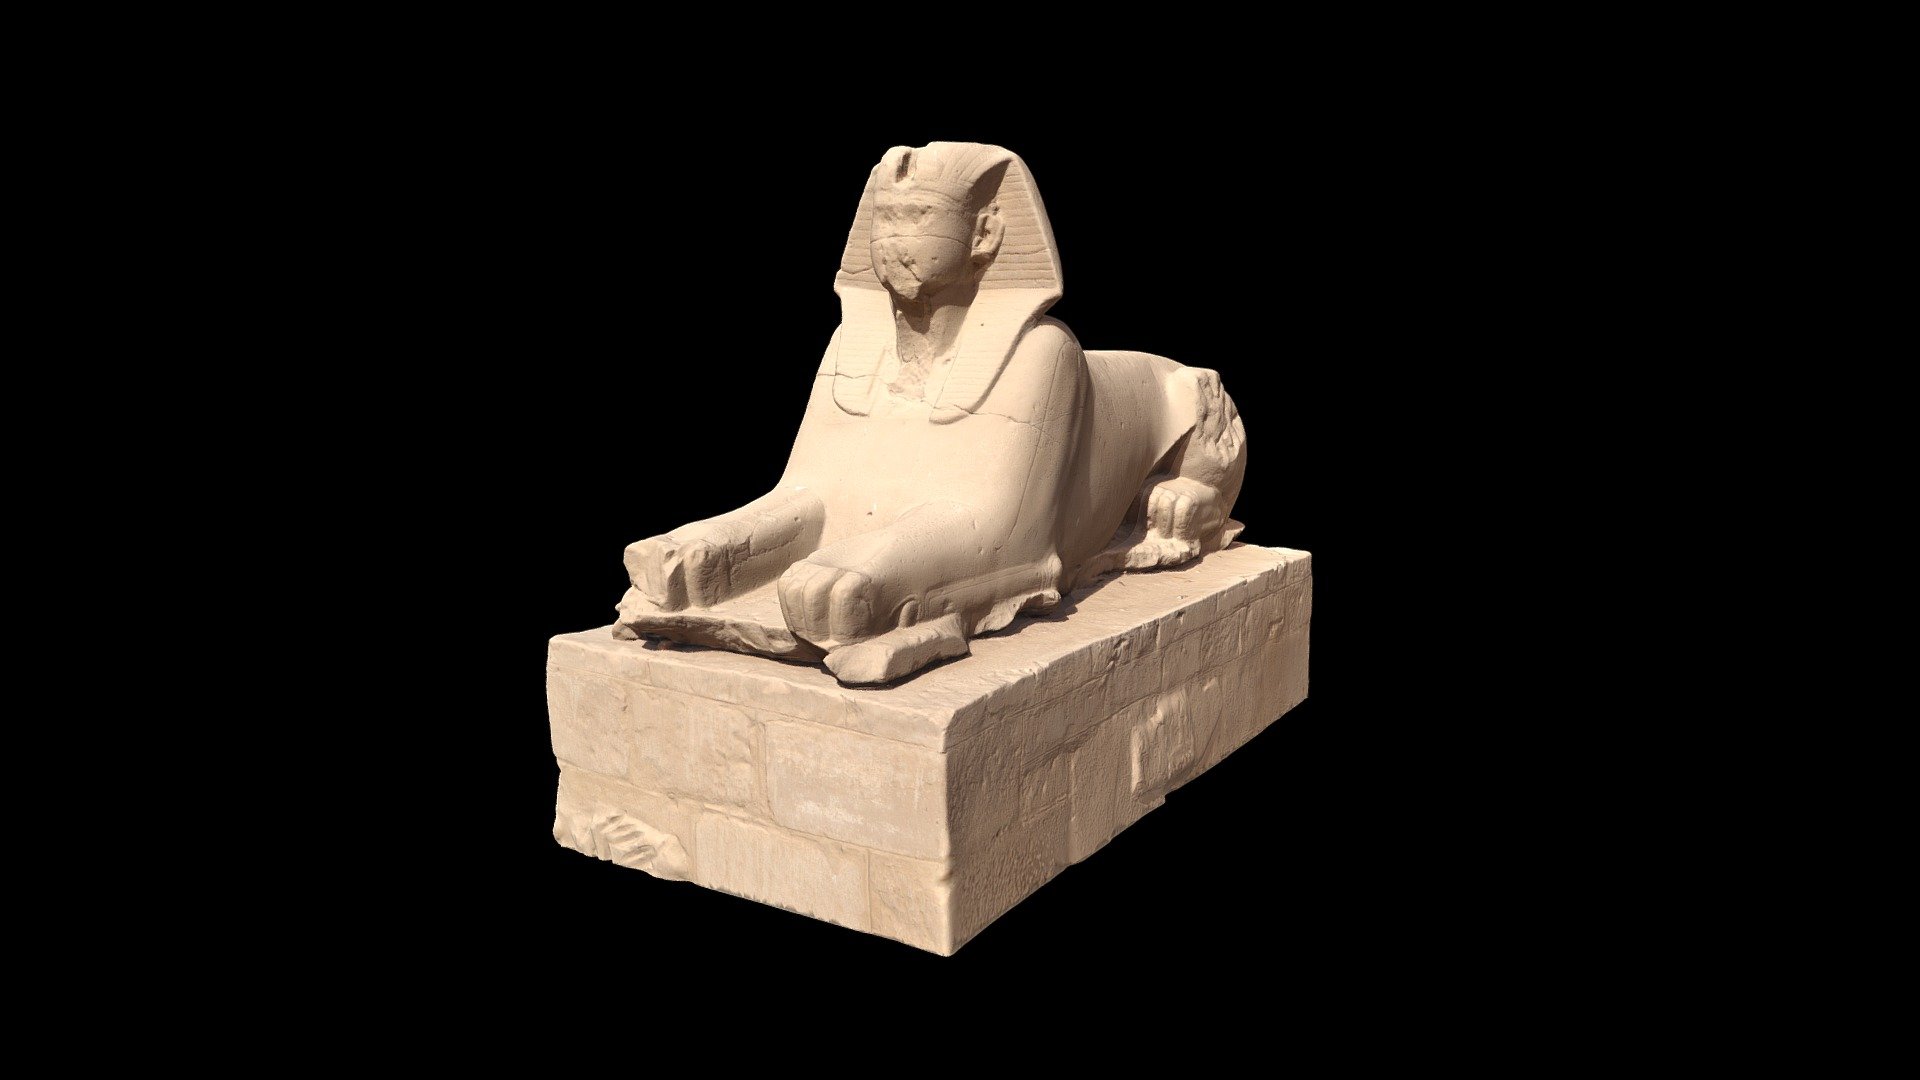 Human headed sphinx in the Mut Temple Precint, Karnak Temple area, Luxor, Egypt.
This sphinx is located to the east of the main N-S axis in area between the propylon and the Mut Temple proper.  

Created with Metashape 1.7.5 3d model